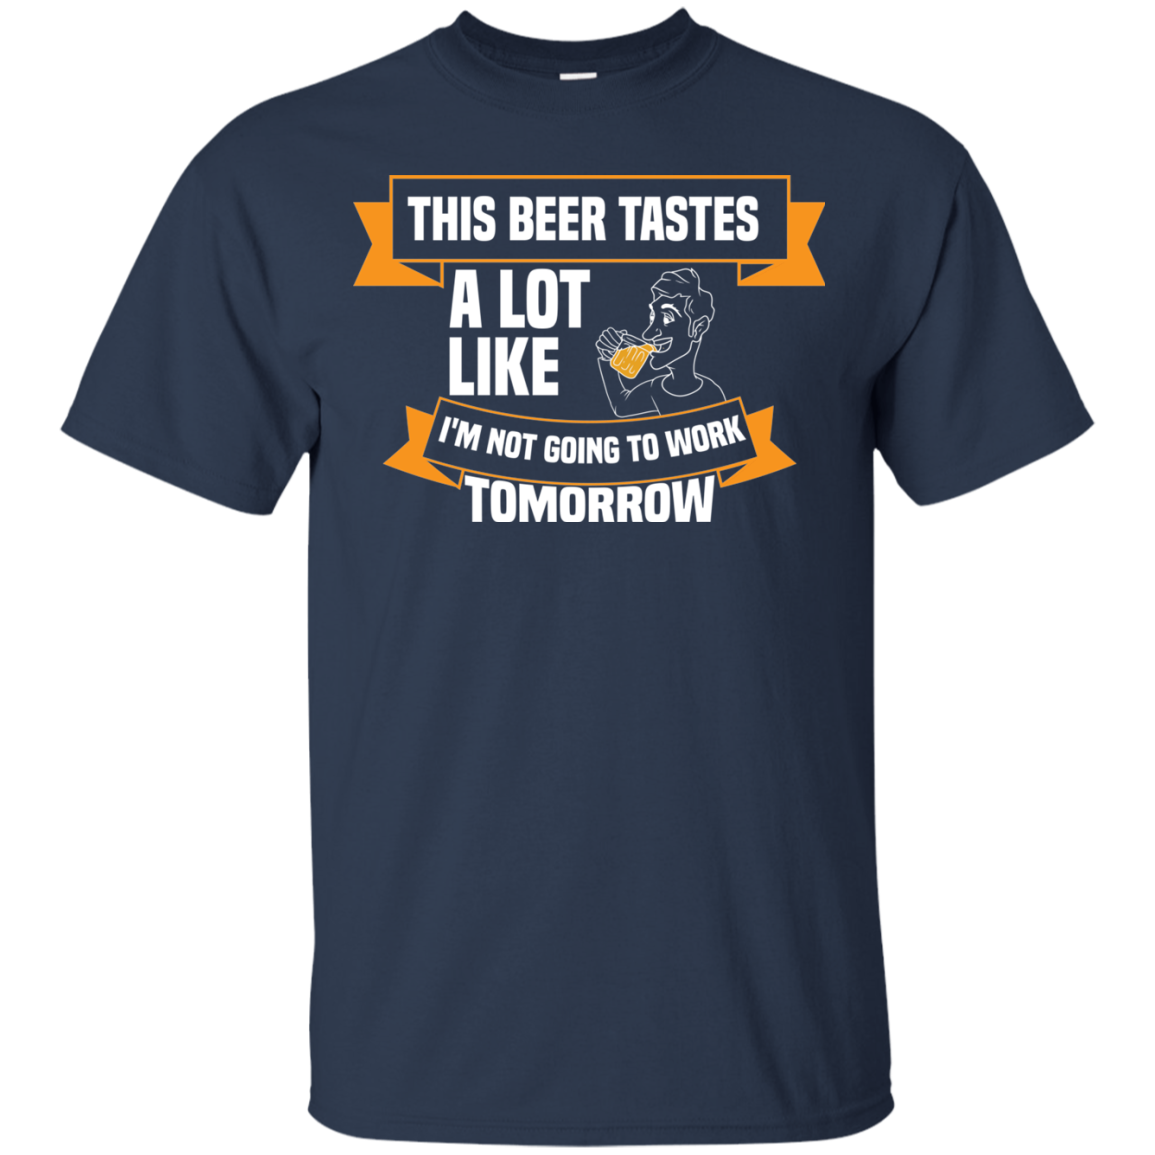 This Beer Tastes A Lot Like I'm Not Going To Work Tomorrow T-Shirt Apparel - The Beer Lodge